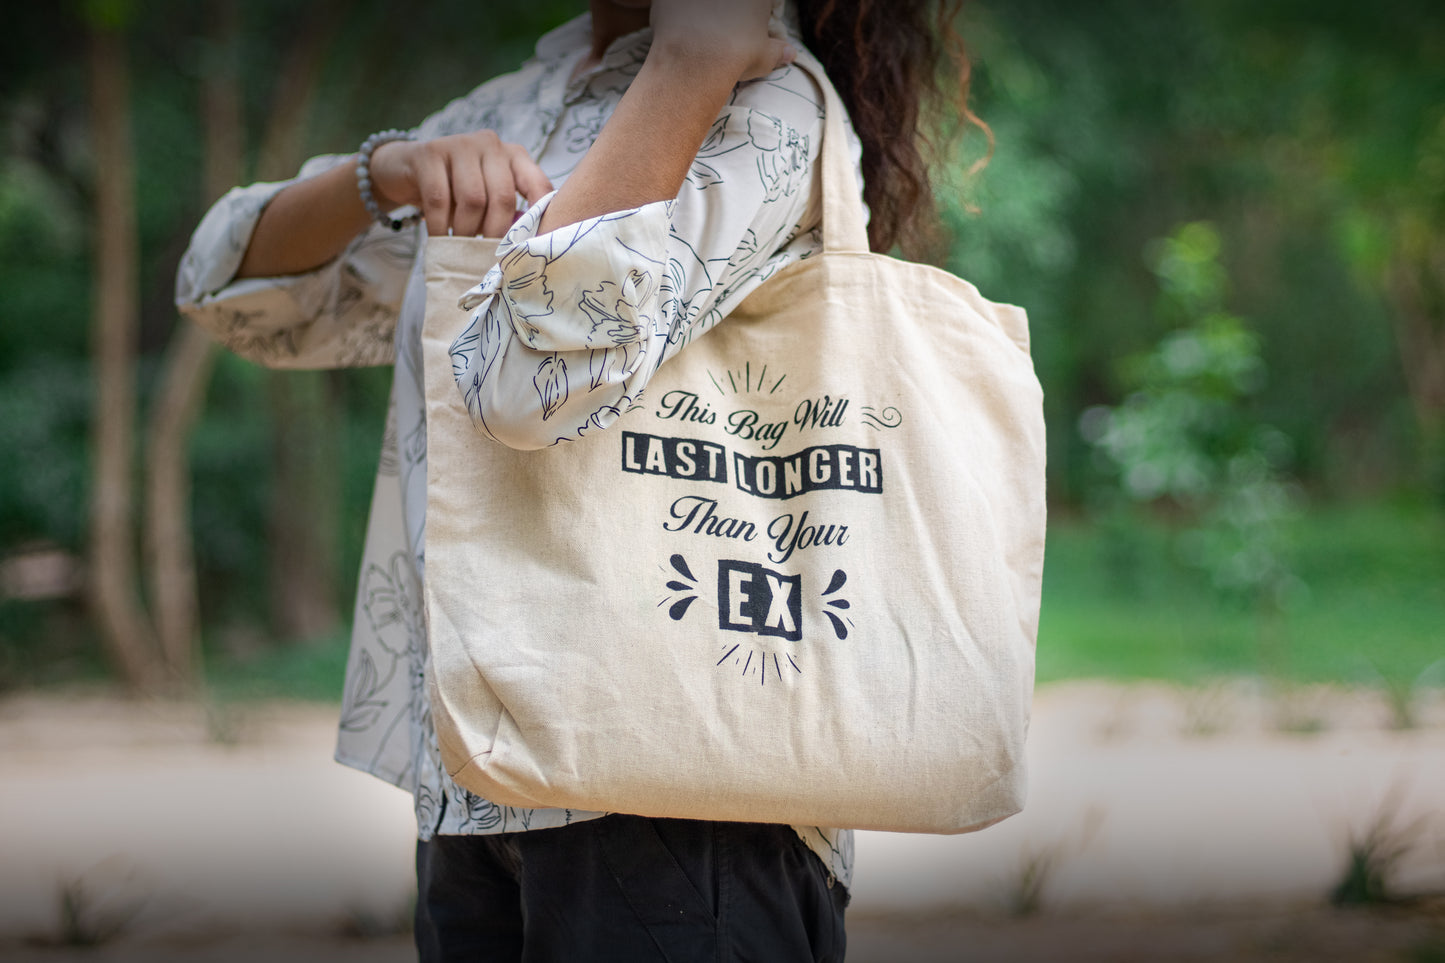 EcoFreaky Sustainable Quirky Tote Bags | For Your Ex